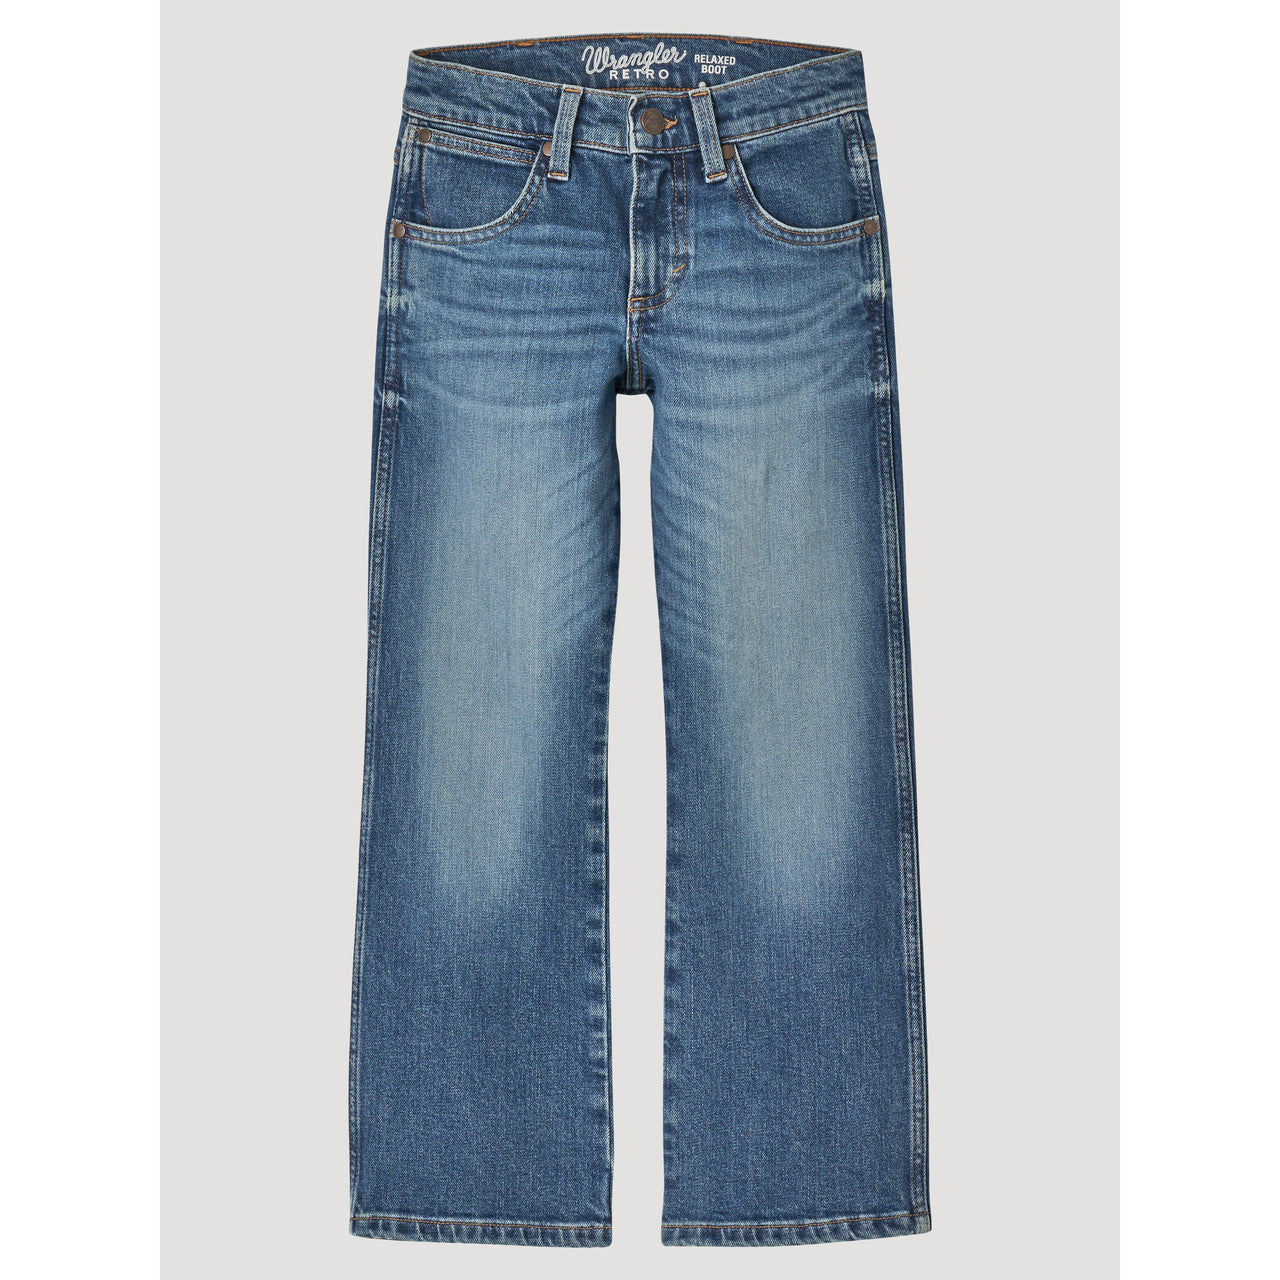 Wrangler Boy's Retro Relaxed Bootcut Jeans - Andalusian